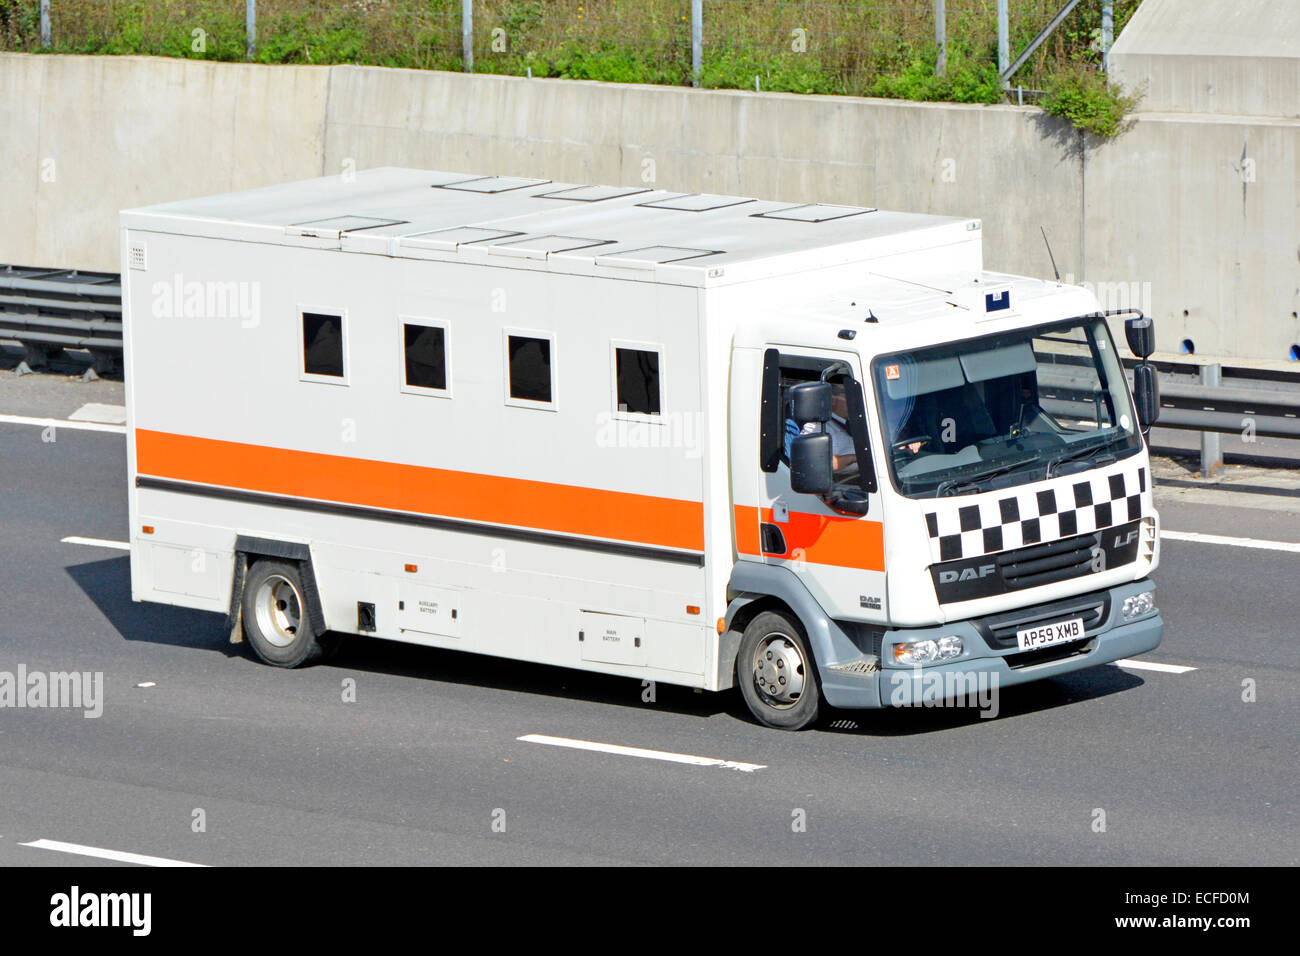 Unmarked Daf prison van lorry truck (assumption based on windows, markings and roof hatches) driving along English motorway Stock Photo